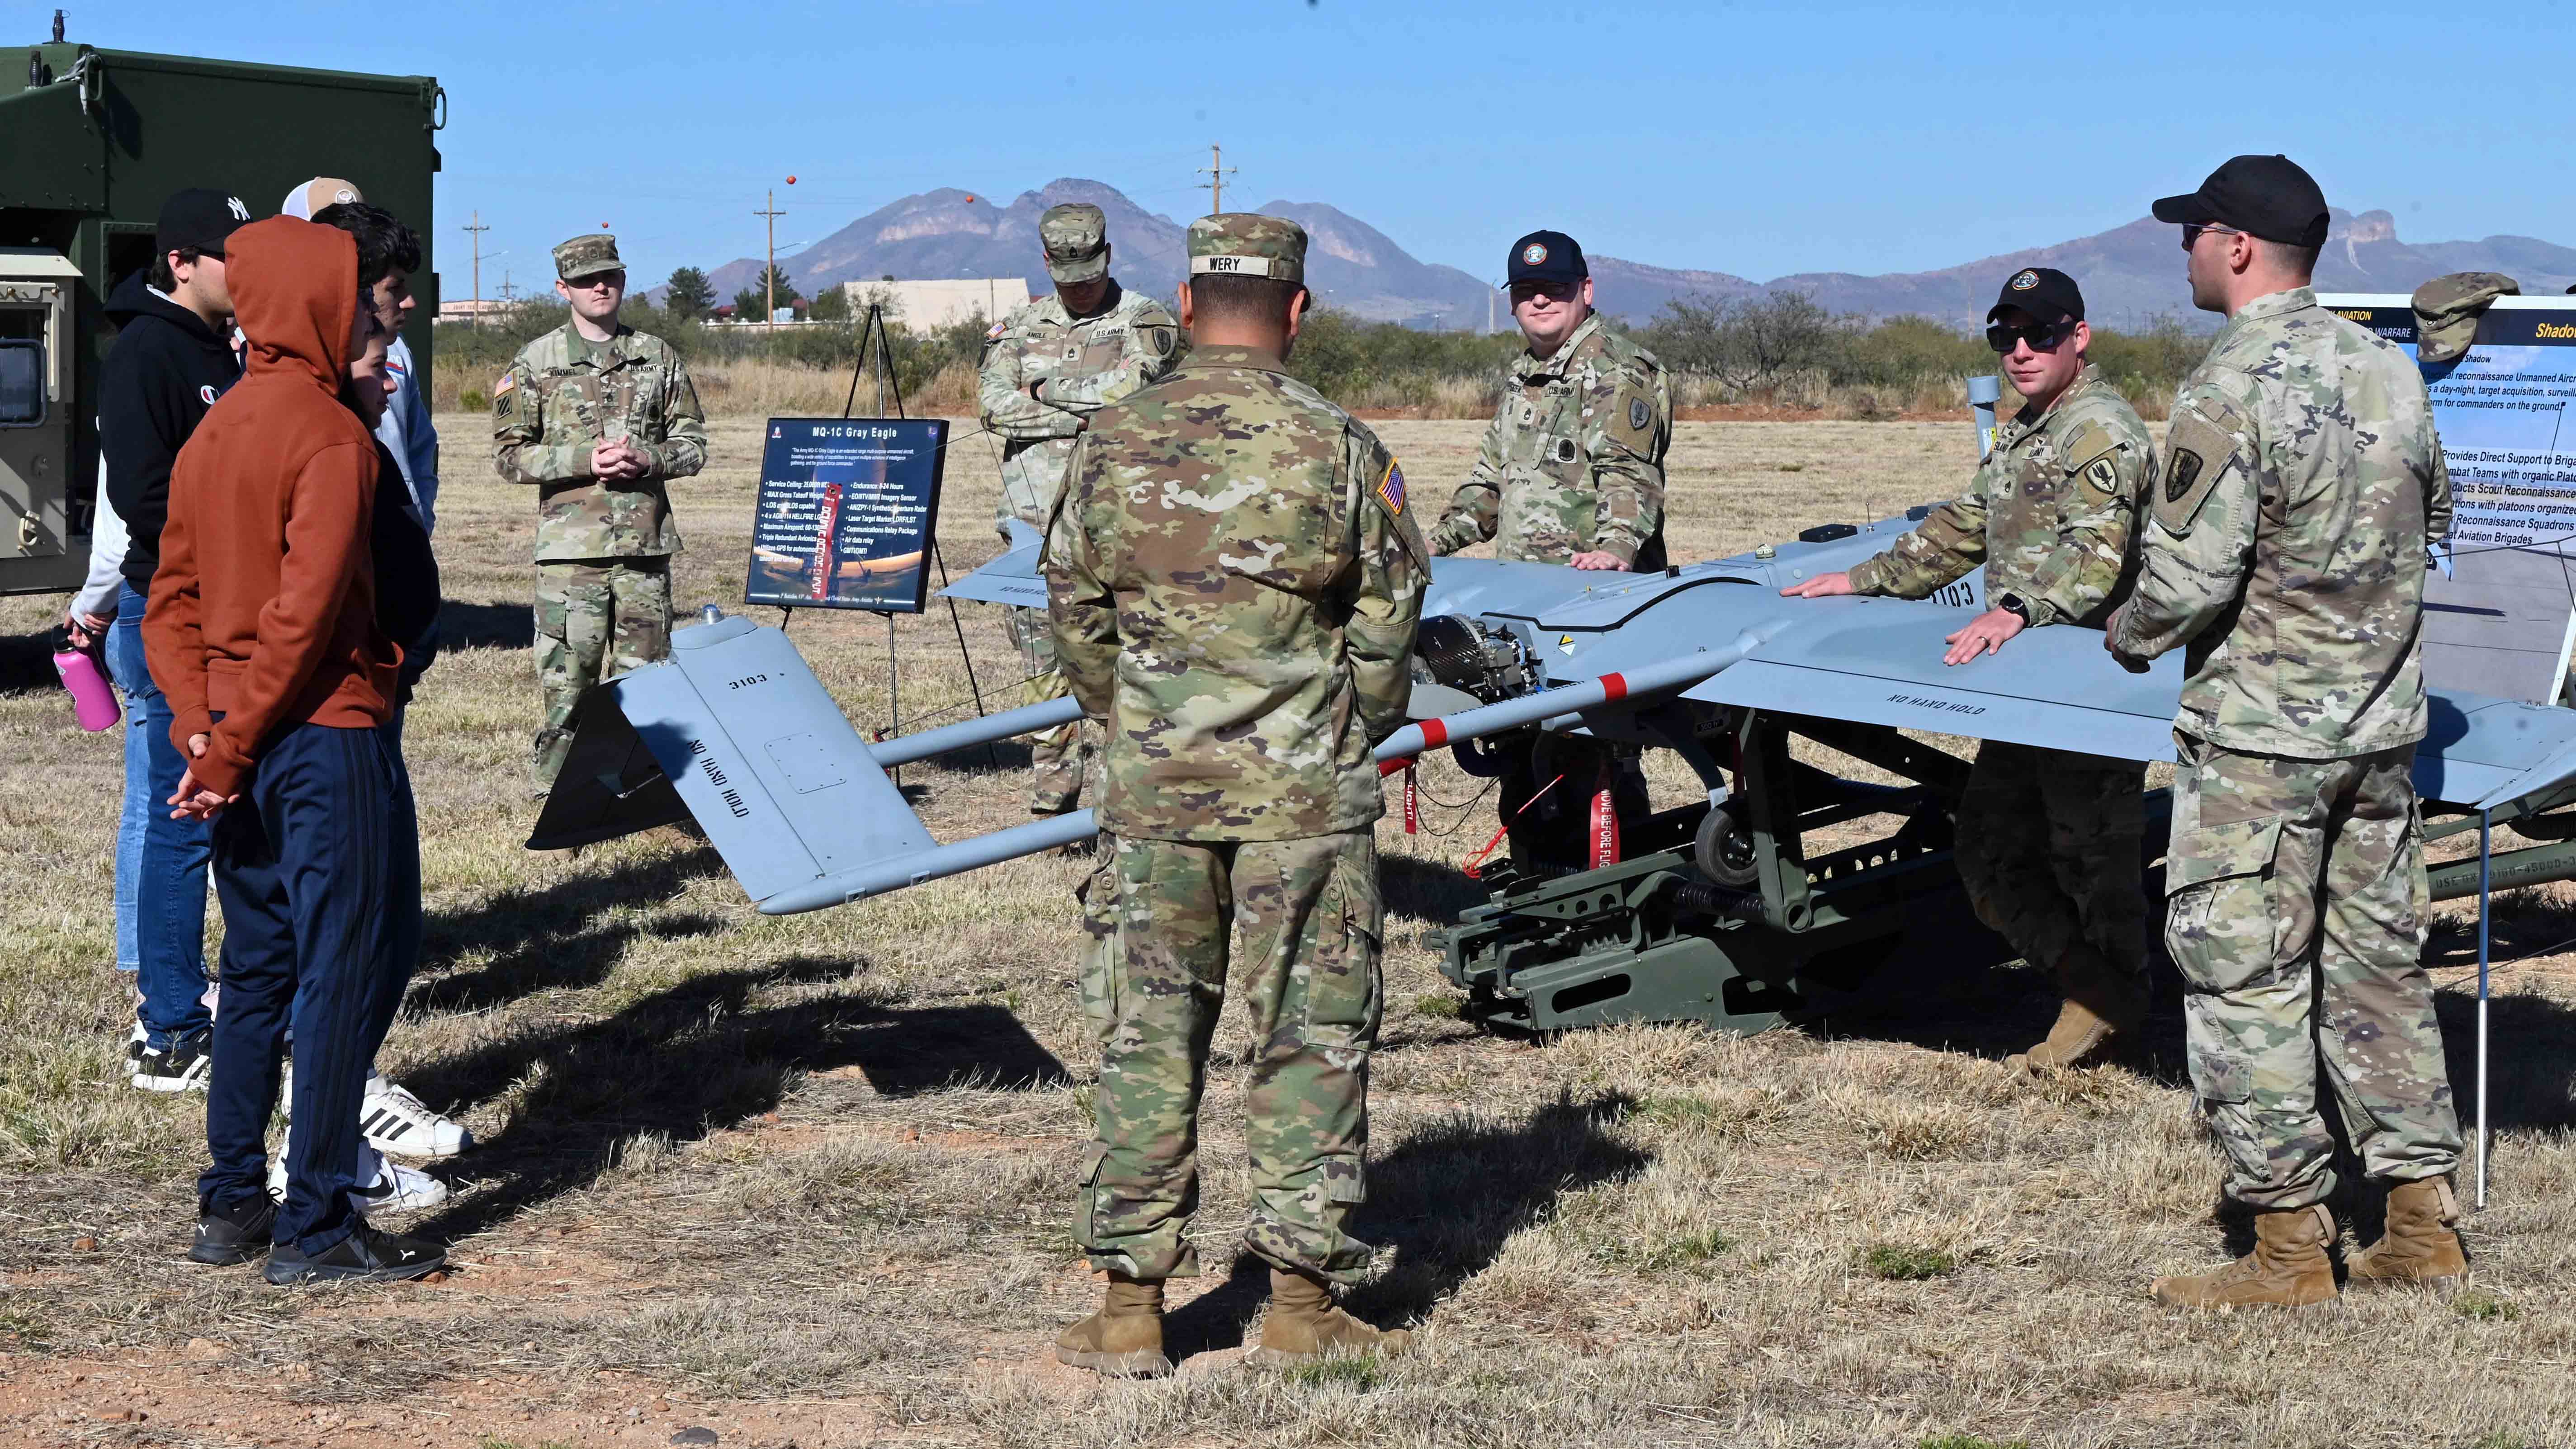 Soldiers with a drone recruiting